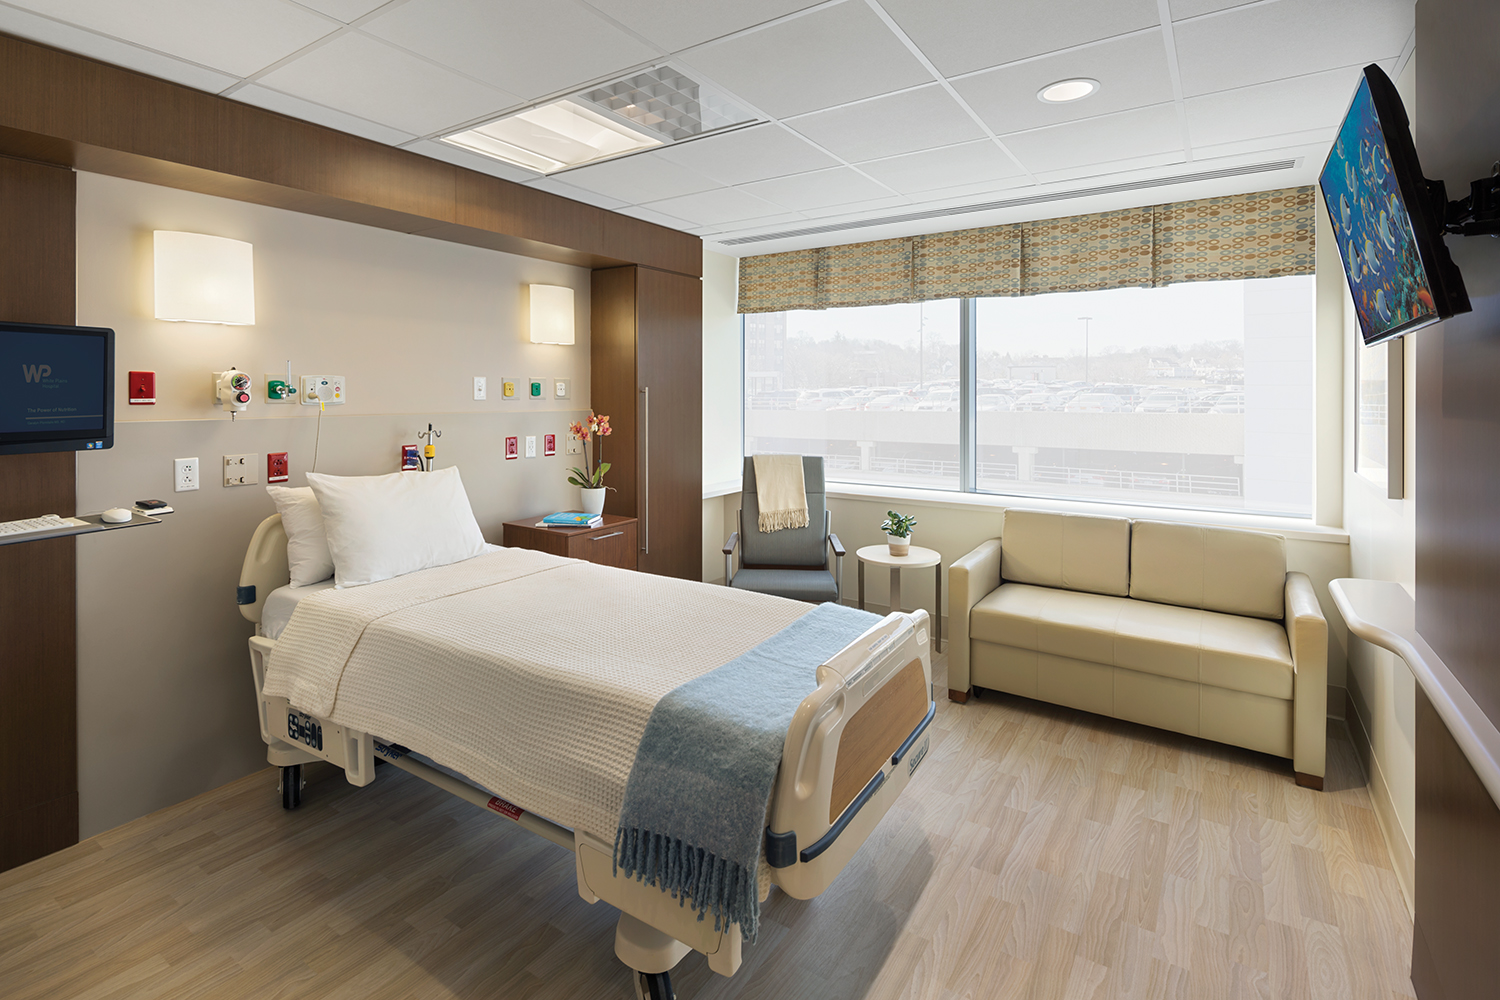 Unity overbed and wall sconce luminaires provide comforting medical lighting in a bright patient room.